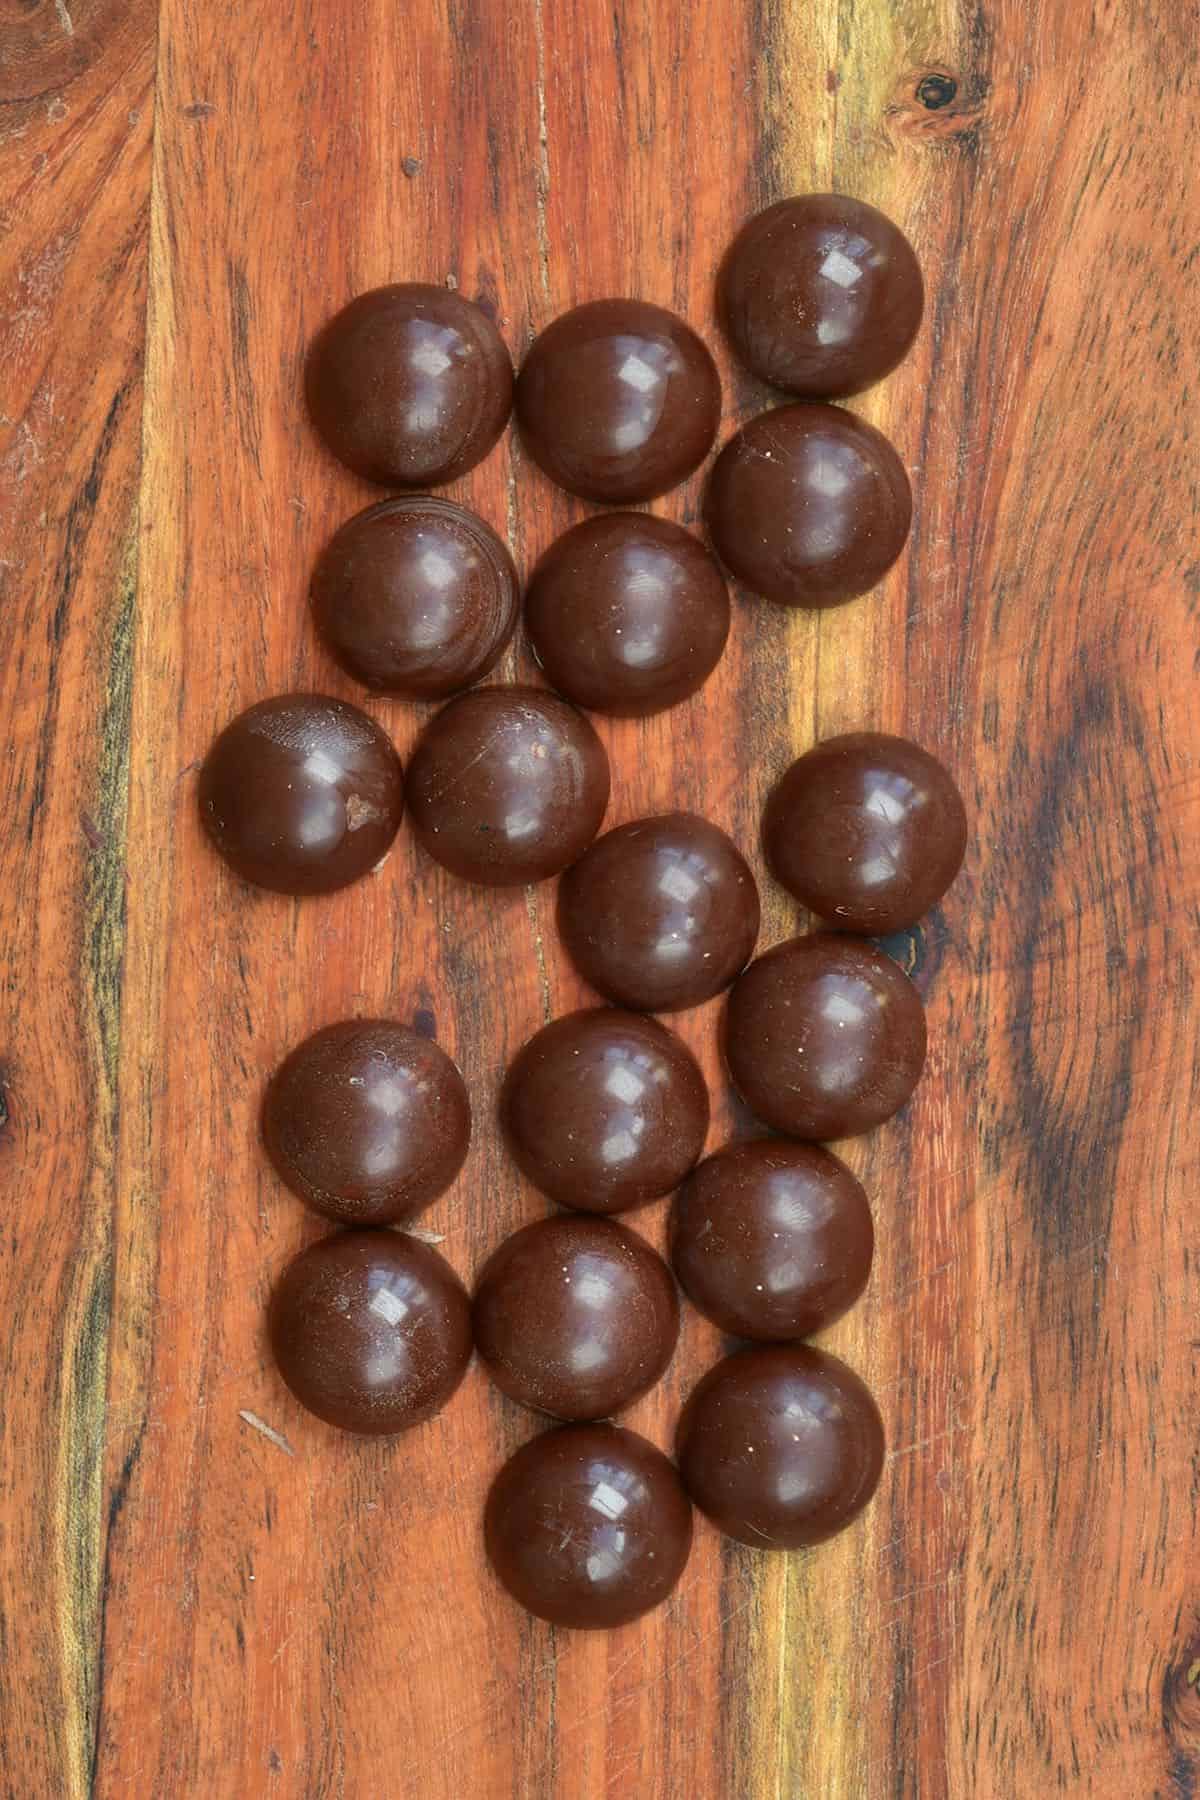 Round chocolates on a flat wooden surface